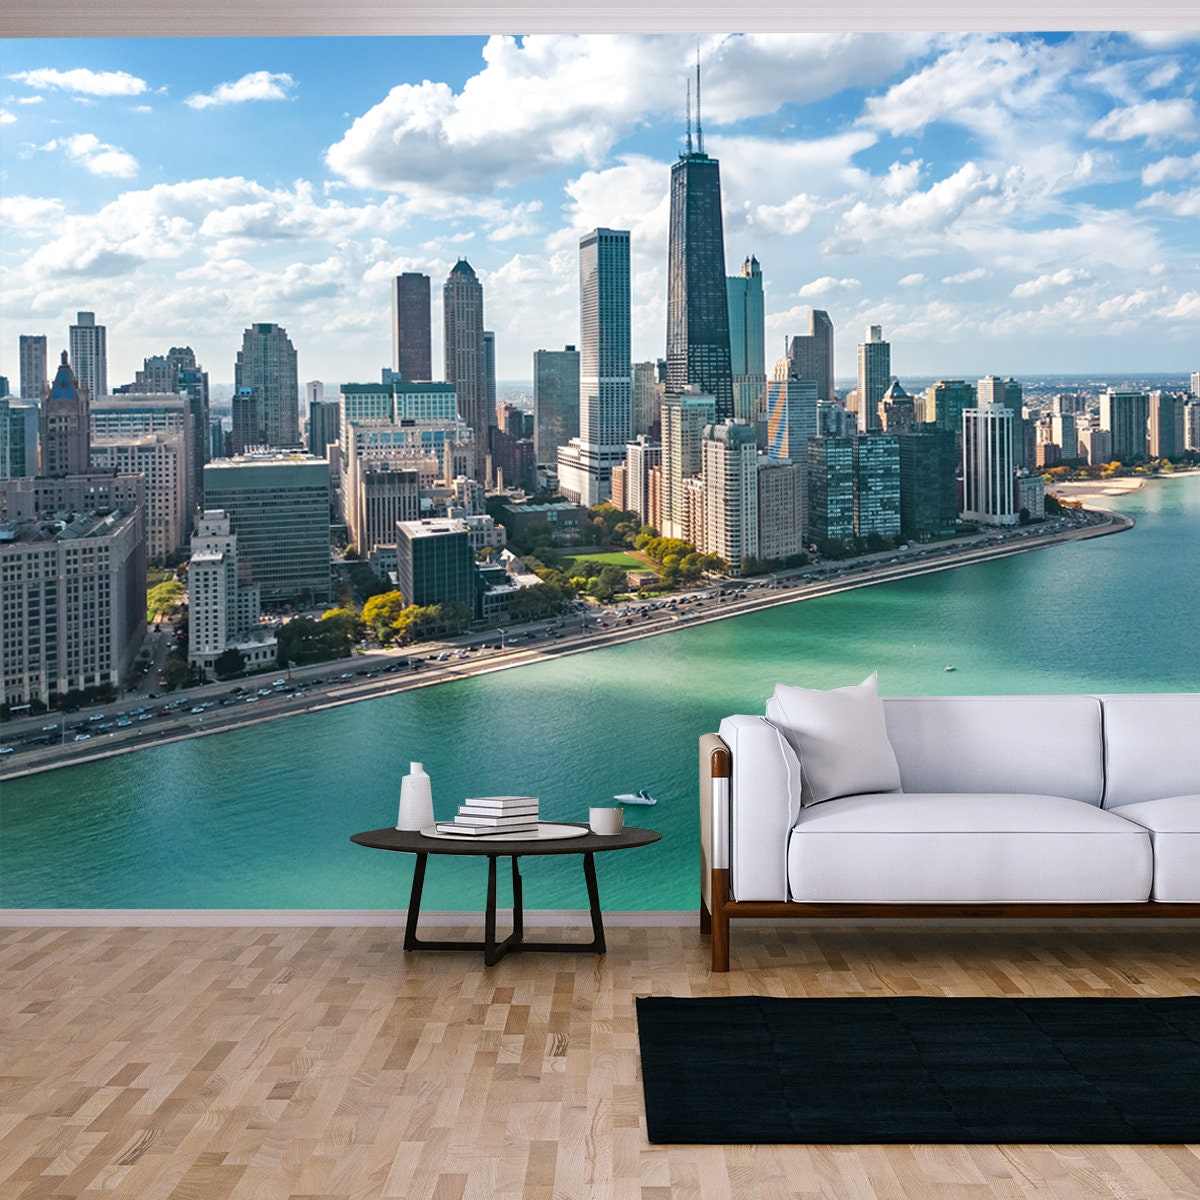 Chicago Skyline, Lake Michigan and City of Chicago Downtown Skyscrapers Cityscape, Illinois, USA Wallpaper Living Room Mural